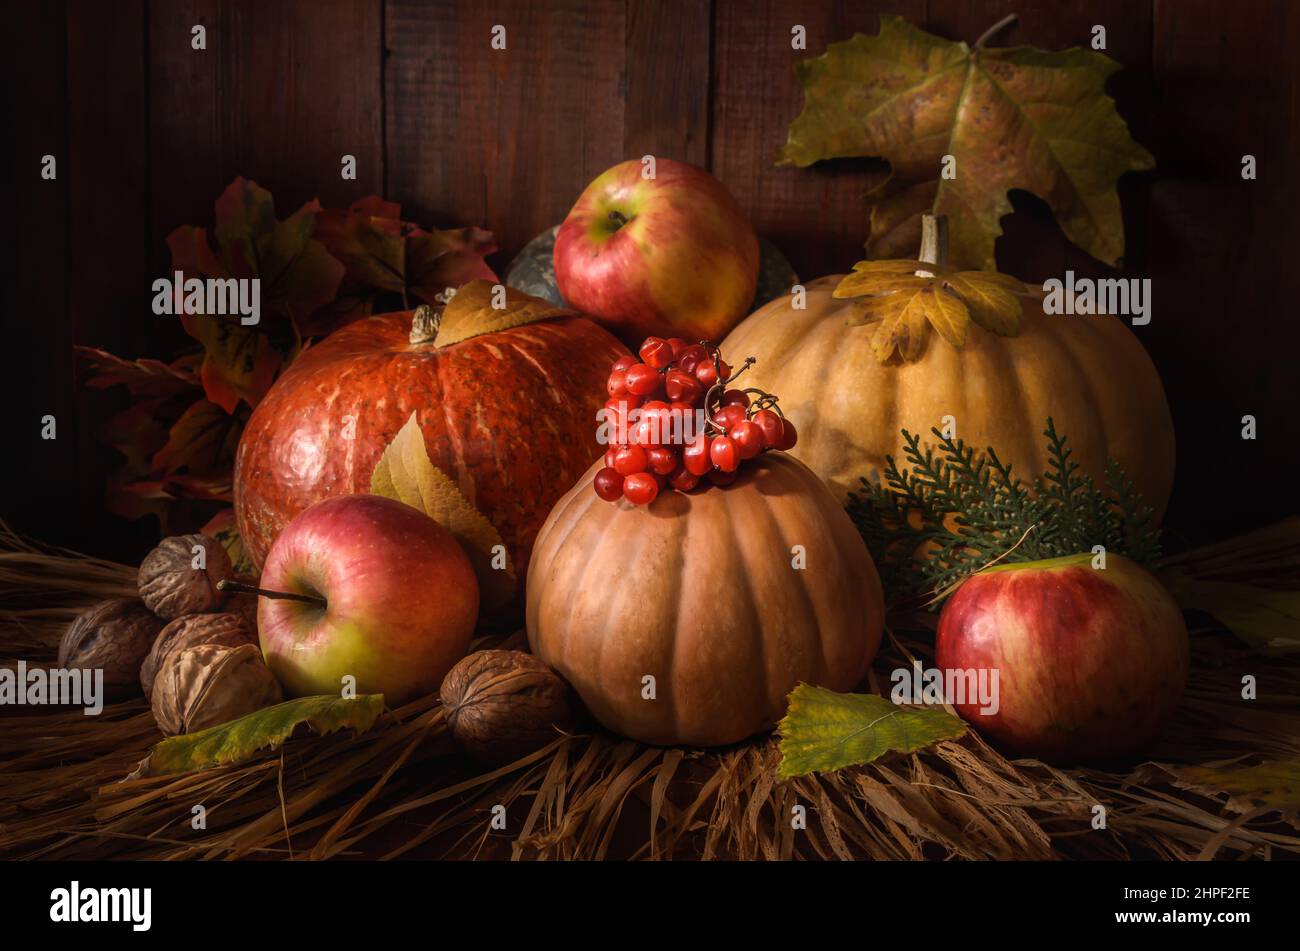 Pumpkin and fruits on dark wooden background Stock Photo